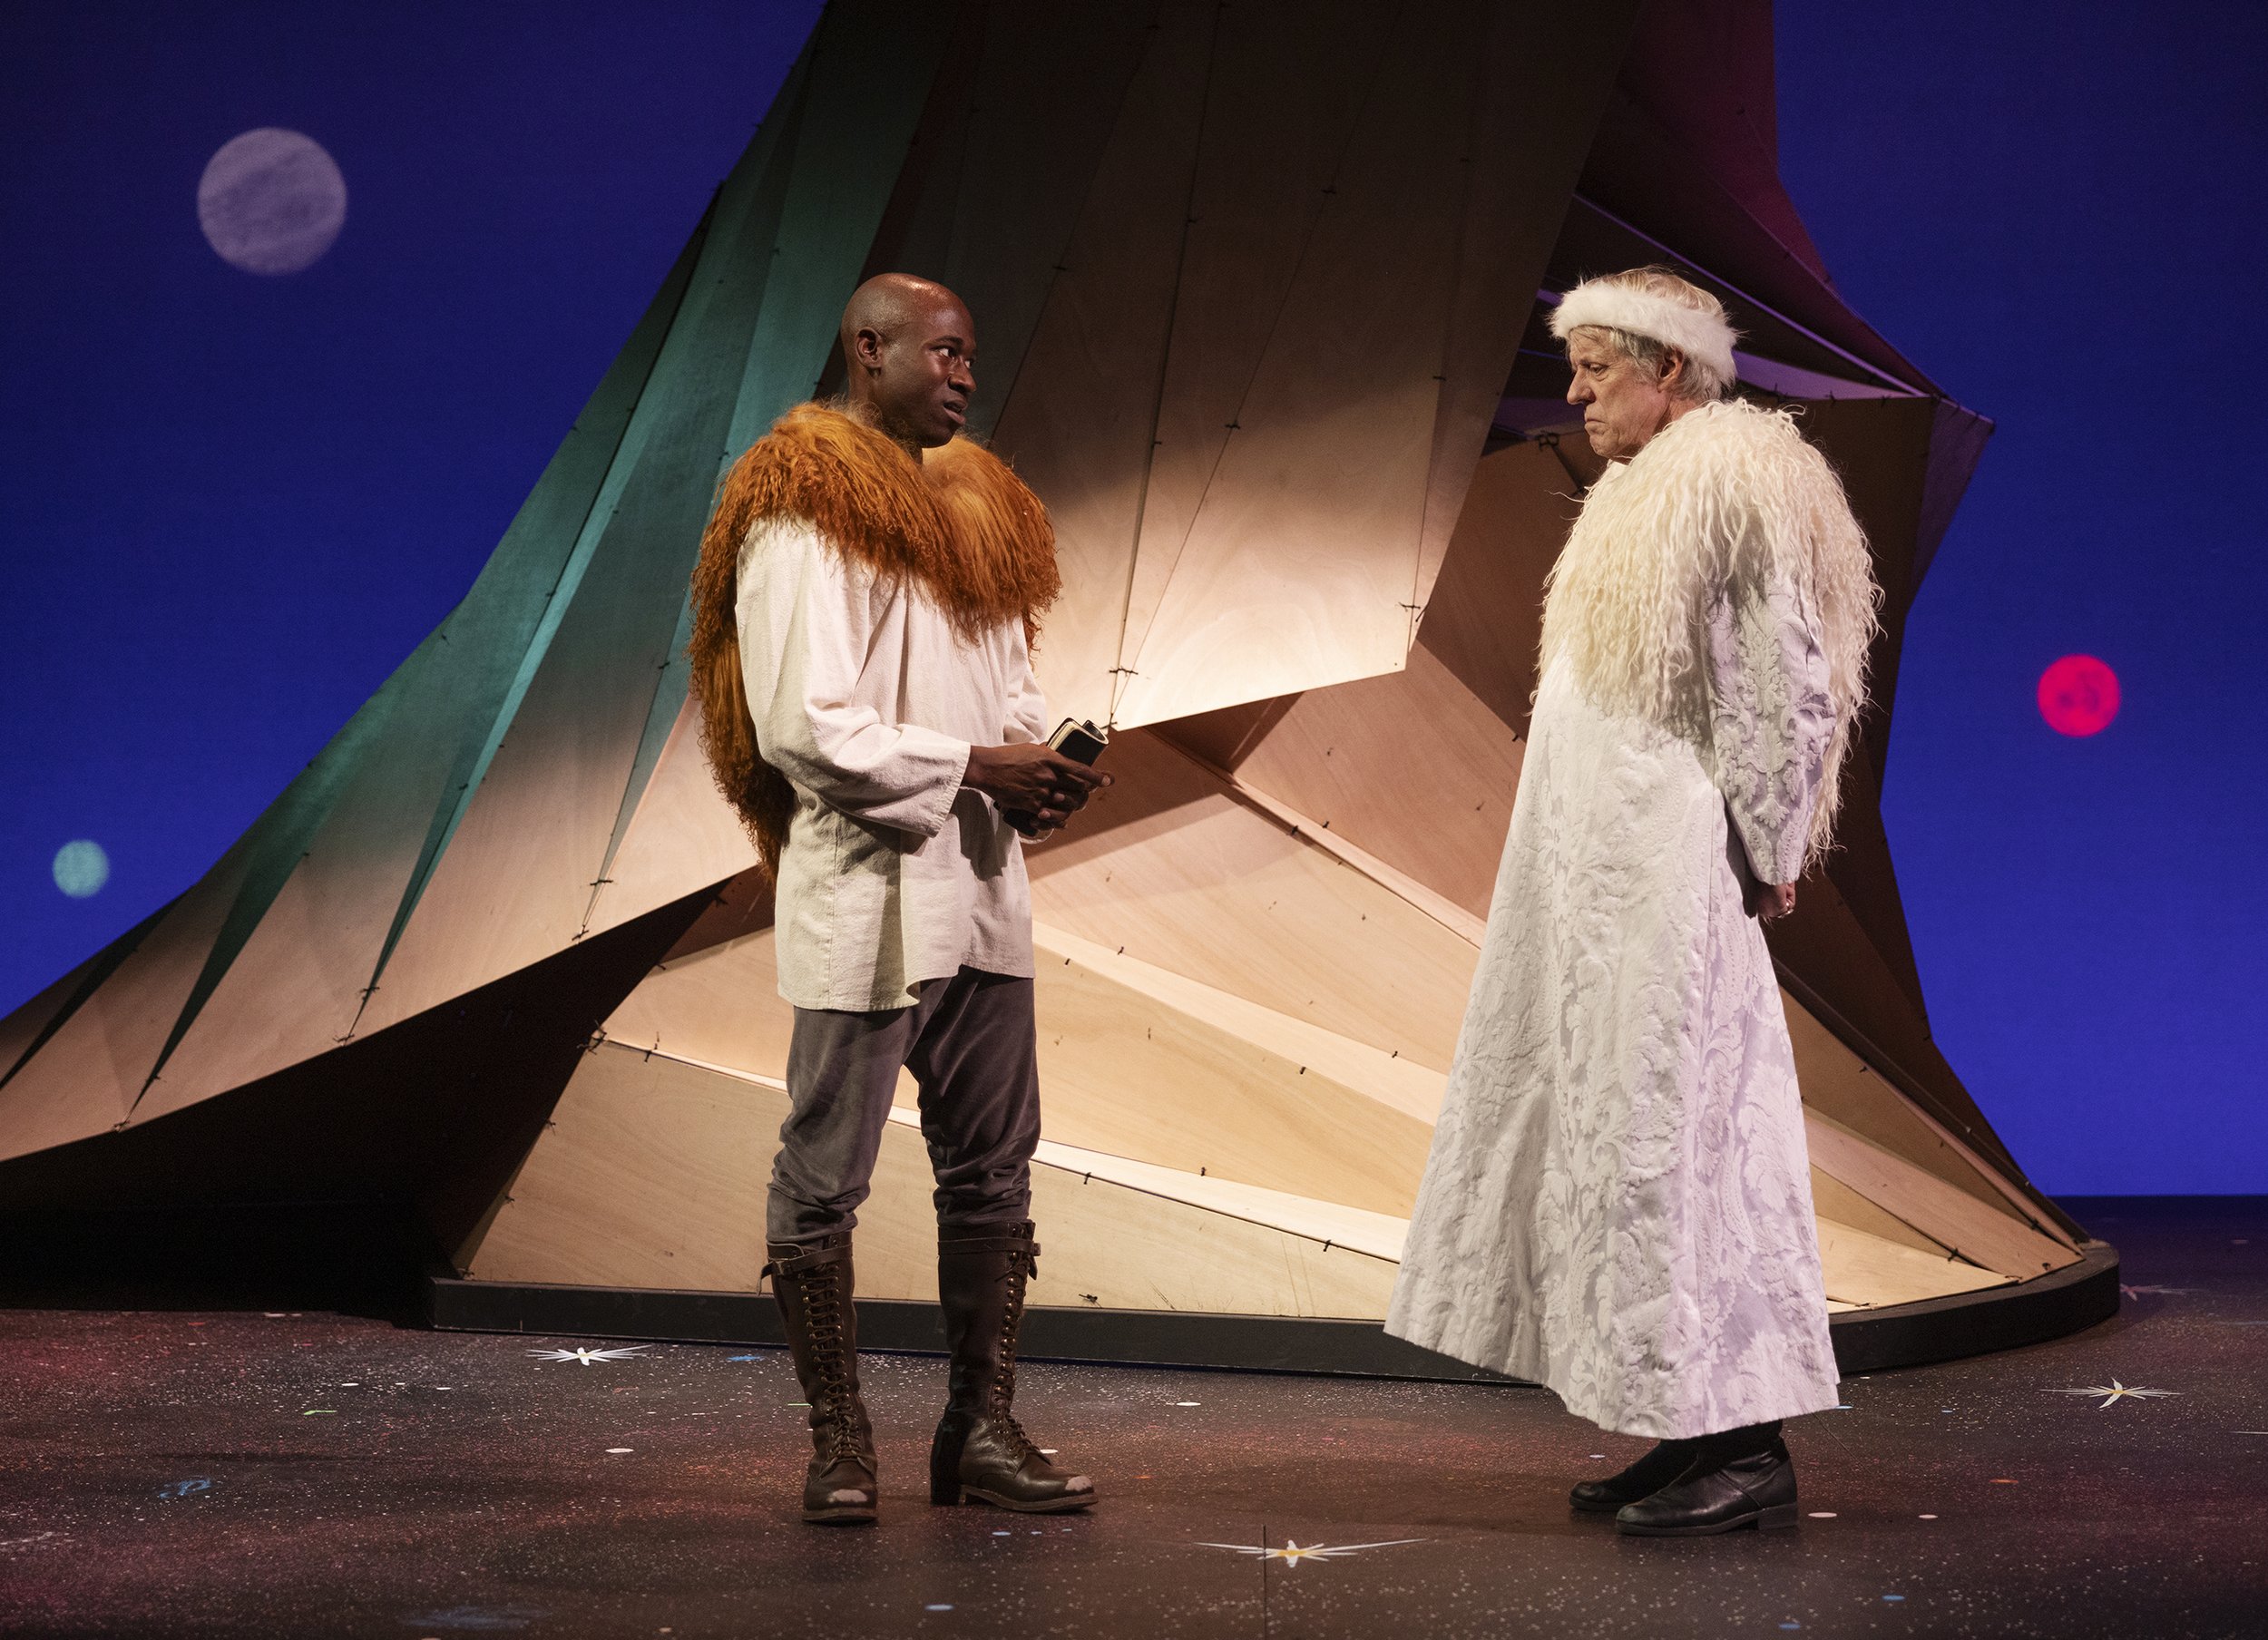 Kevin Aoussou as Genly Ai and Joseph McGrath as King Argaven. Photo courtesy of Tim Fuller.